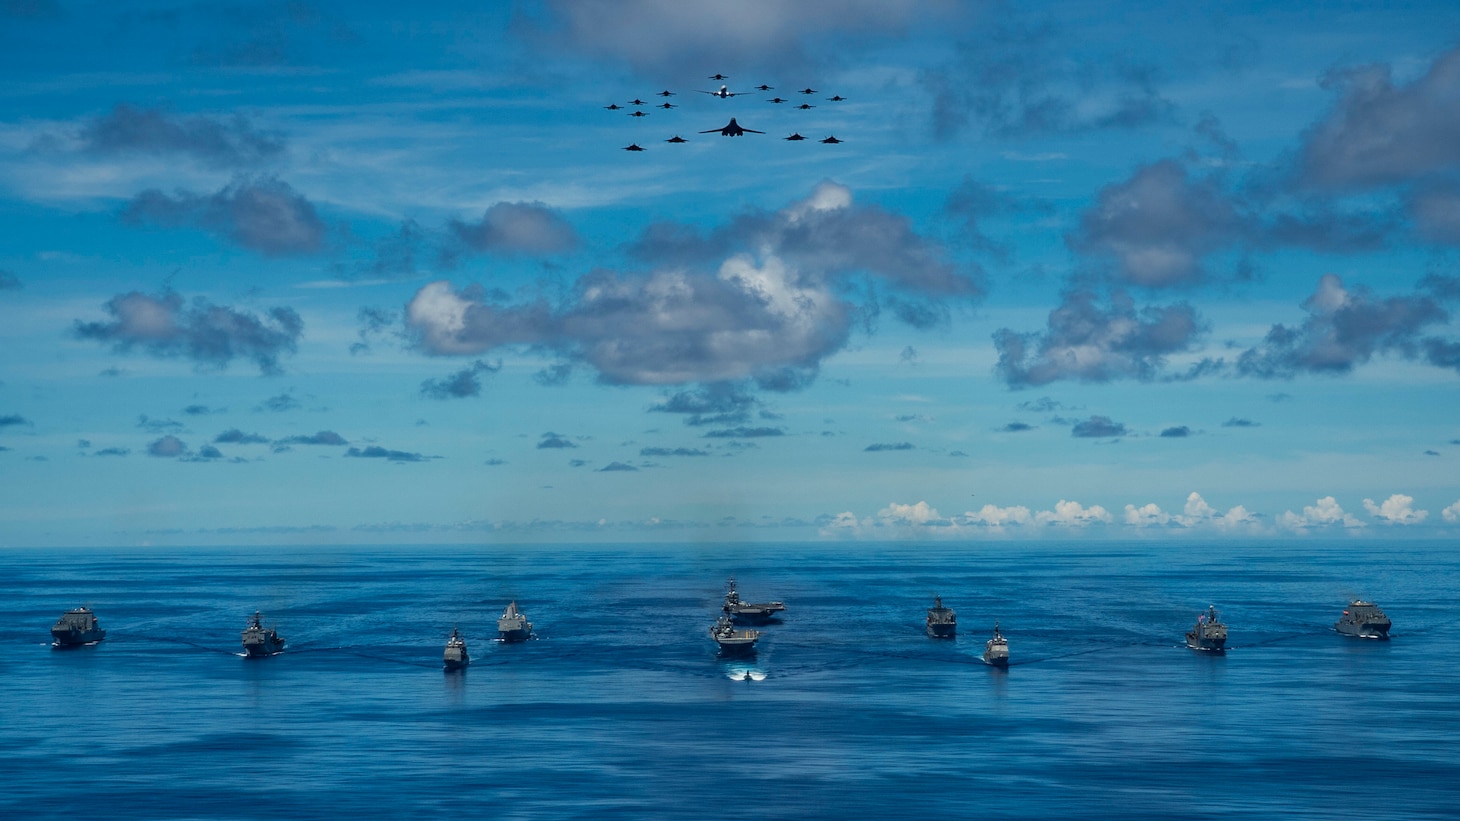 Ships participating in Valiant Shield 2020 steam in formation while E/A-18G Growlers and FA-18E Super Hornets from Carrier Air Wing (CVW) 5, a P-8 Poseidon assigned to Commander Task Force 72, and U.S. Air Force F-22 Raptors and a B-1B Bomber fly over the formation.